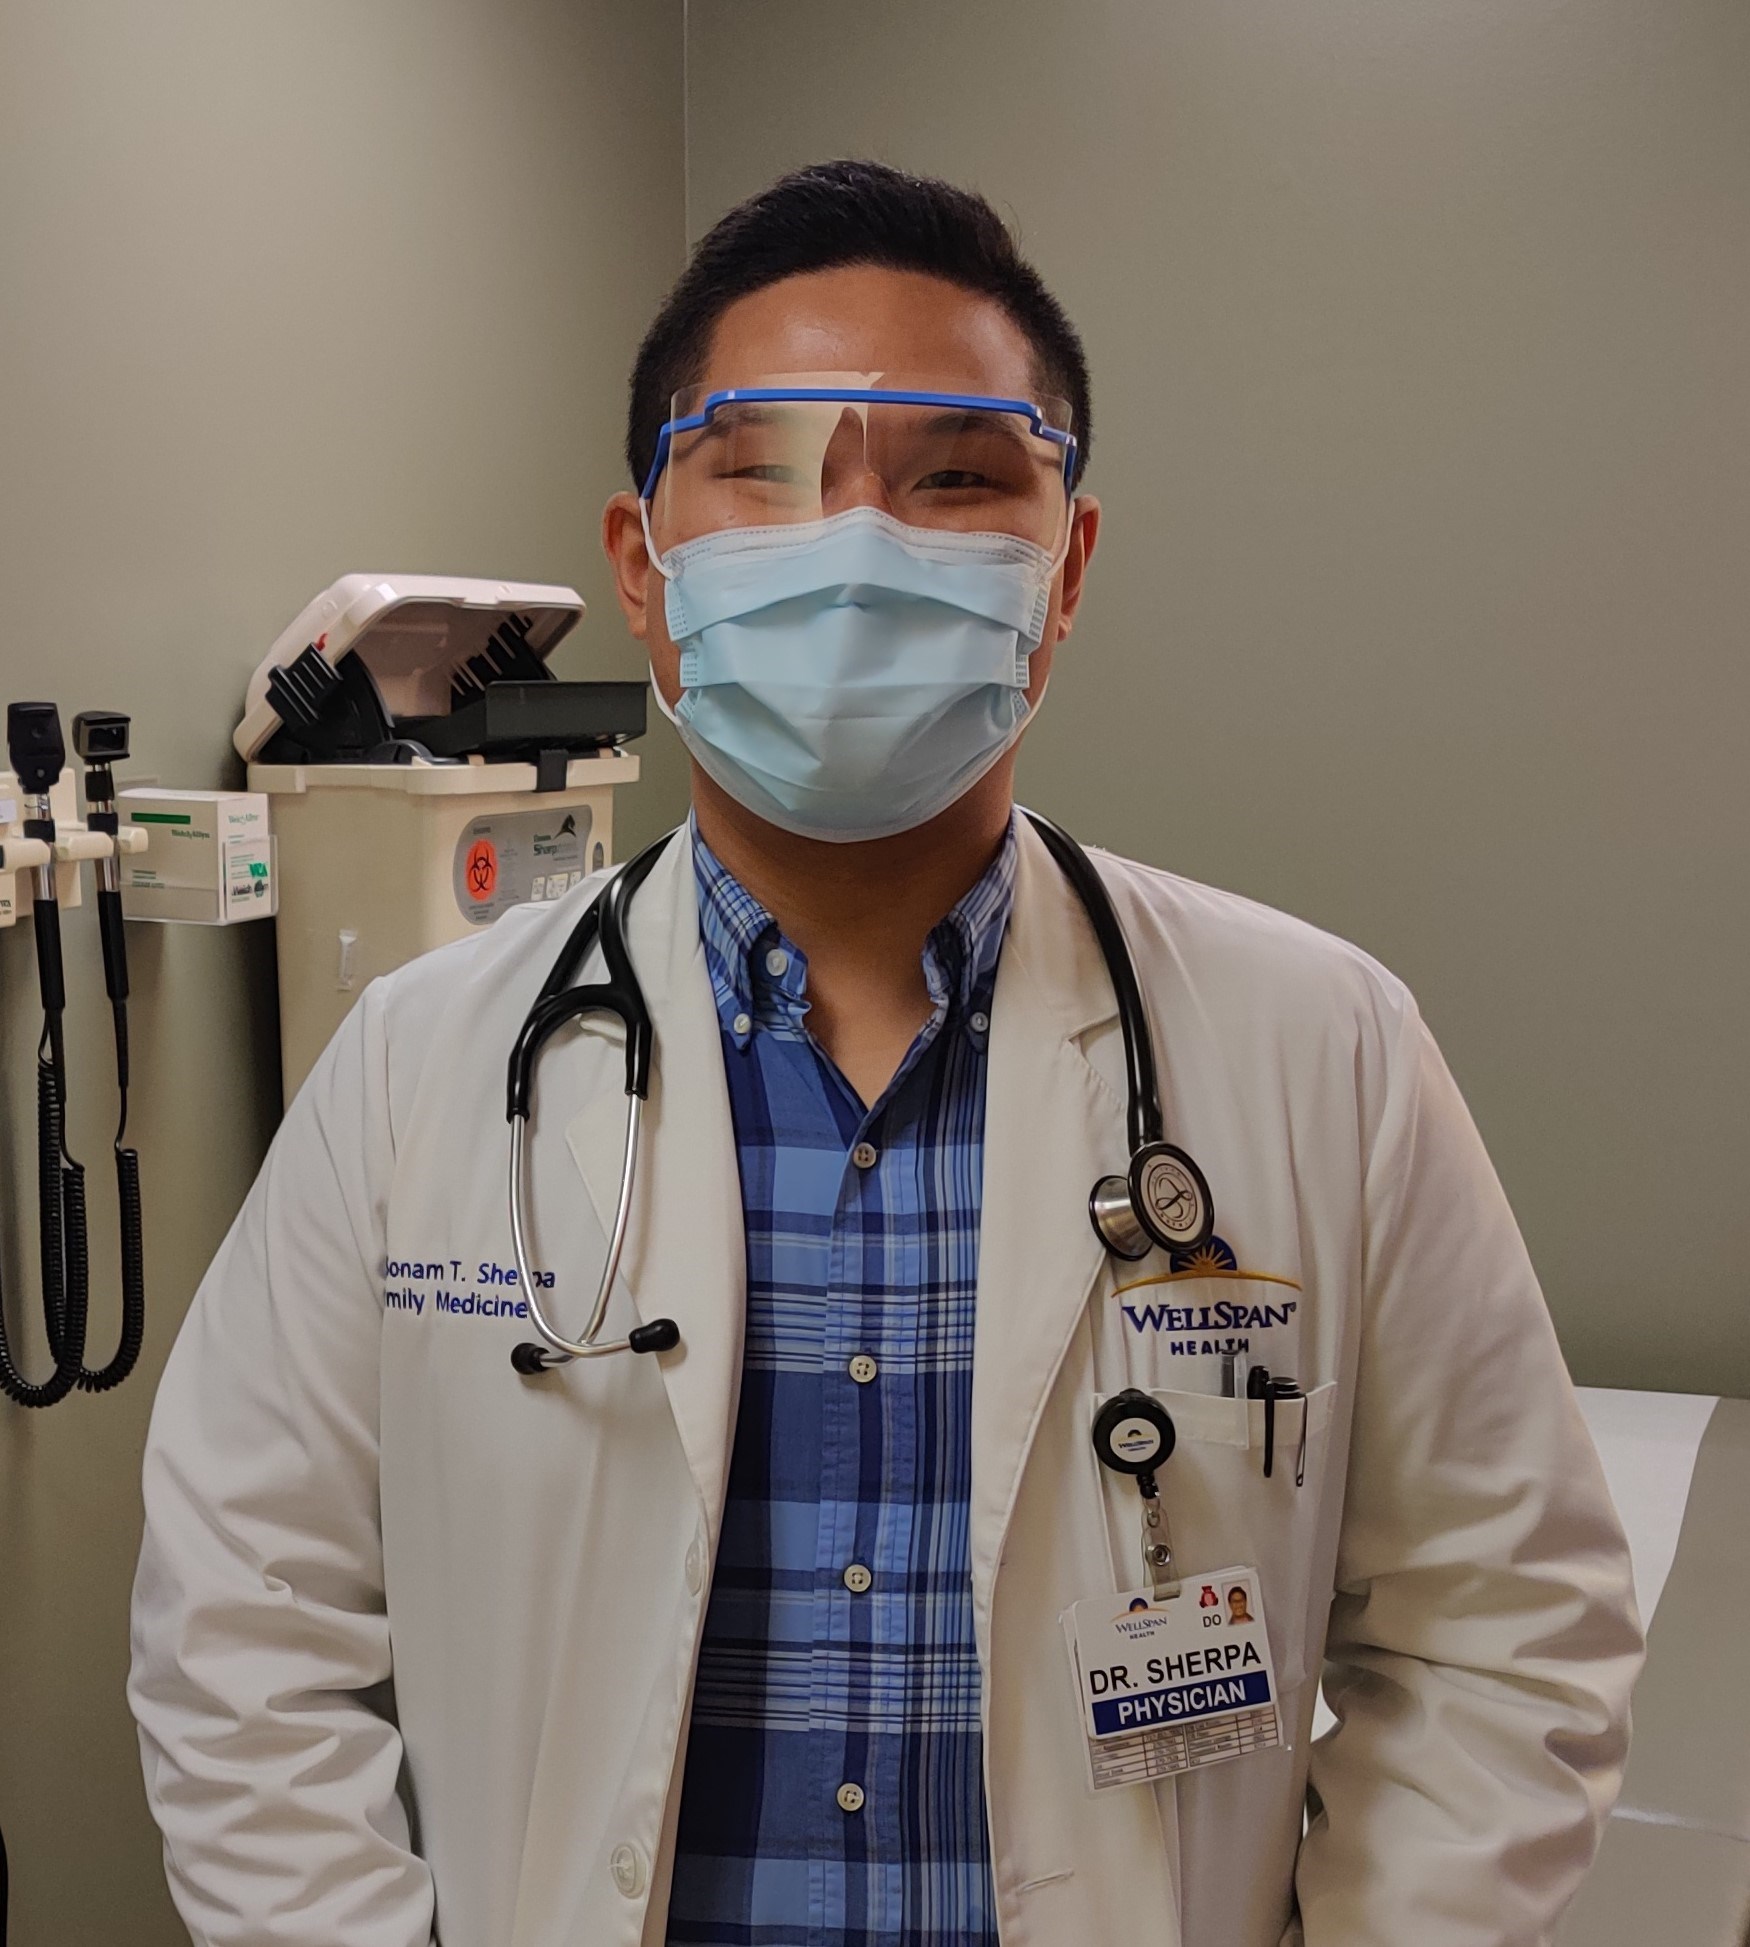 Sonam Sherpa, D.O., a second-year family medicine resident at WellSpan Good Samaritan Hospital, has helped to care for COVID-19 patients in the hospital's intensive care unit.